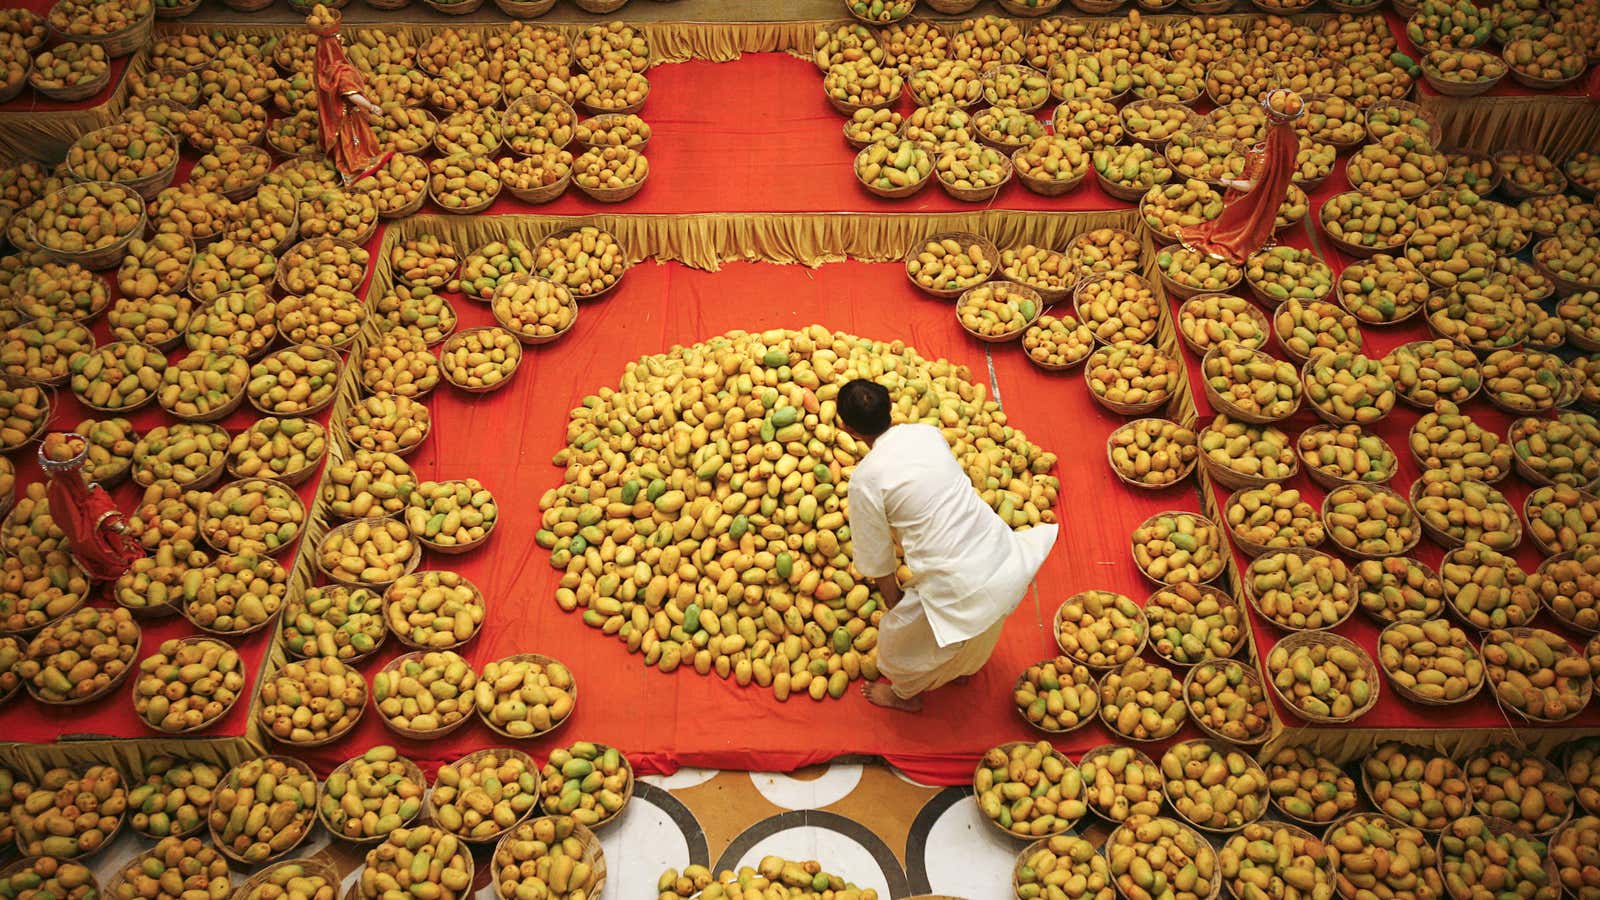 Mango is called the king of fruits in India.